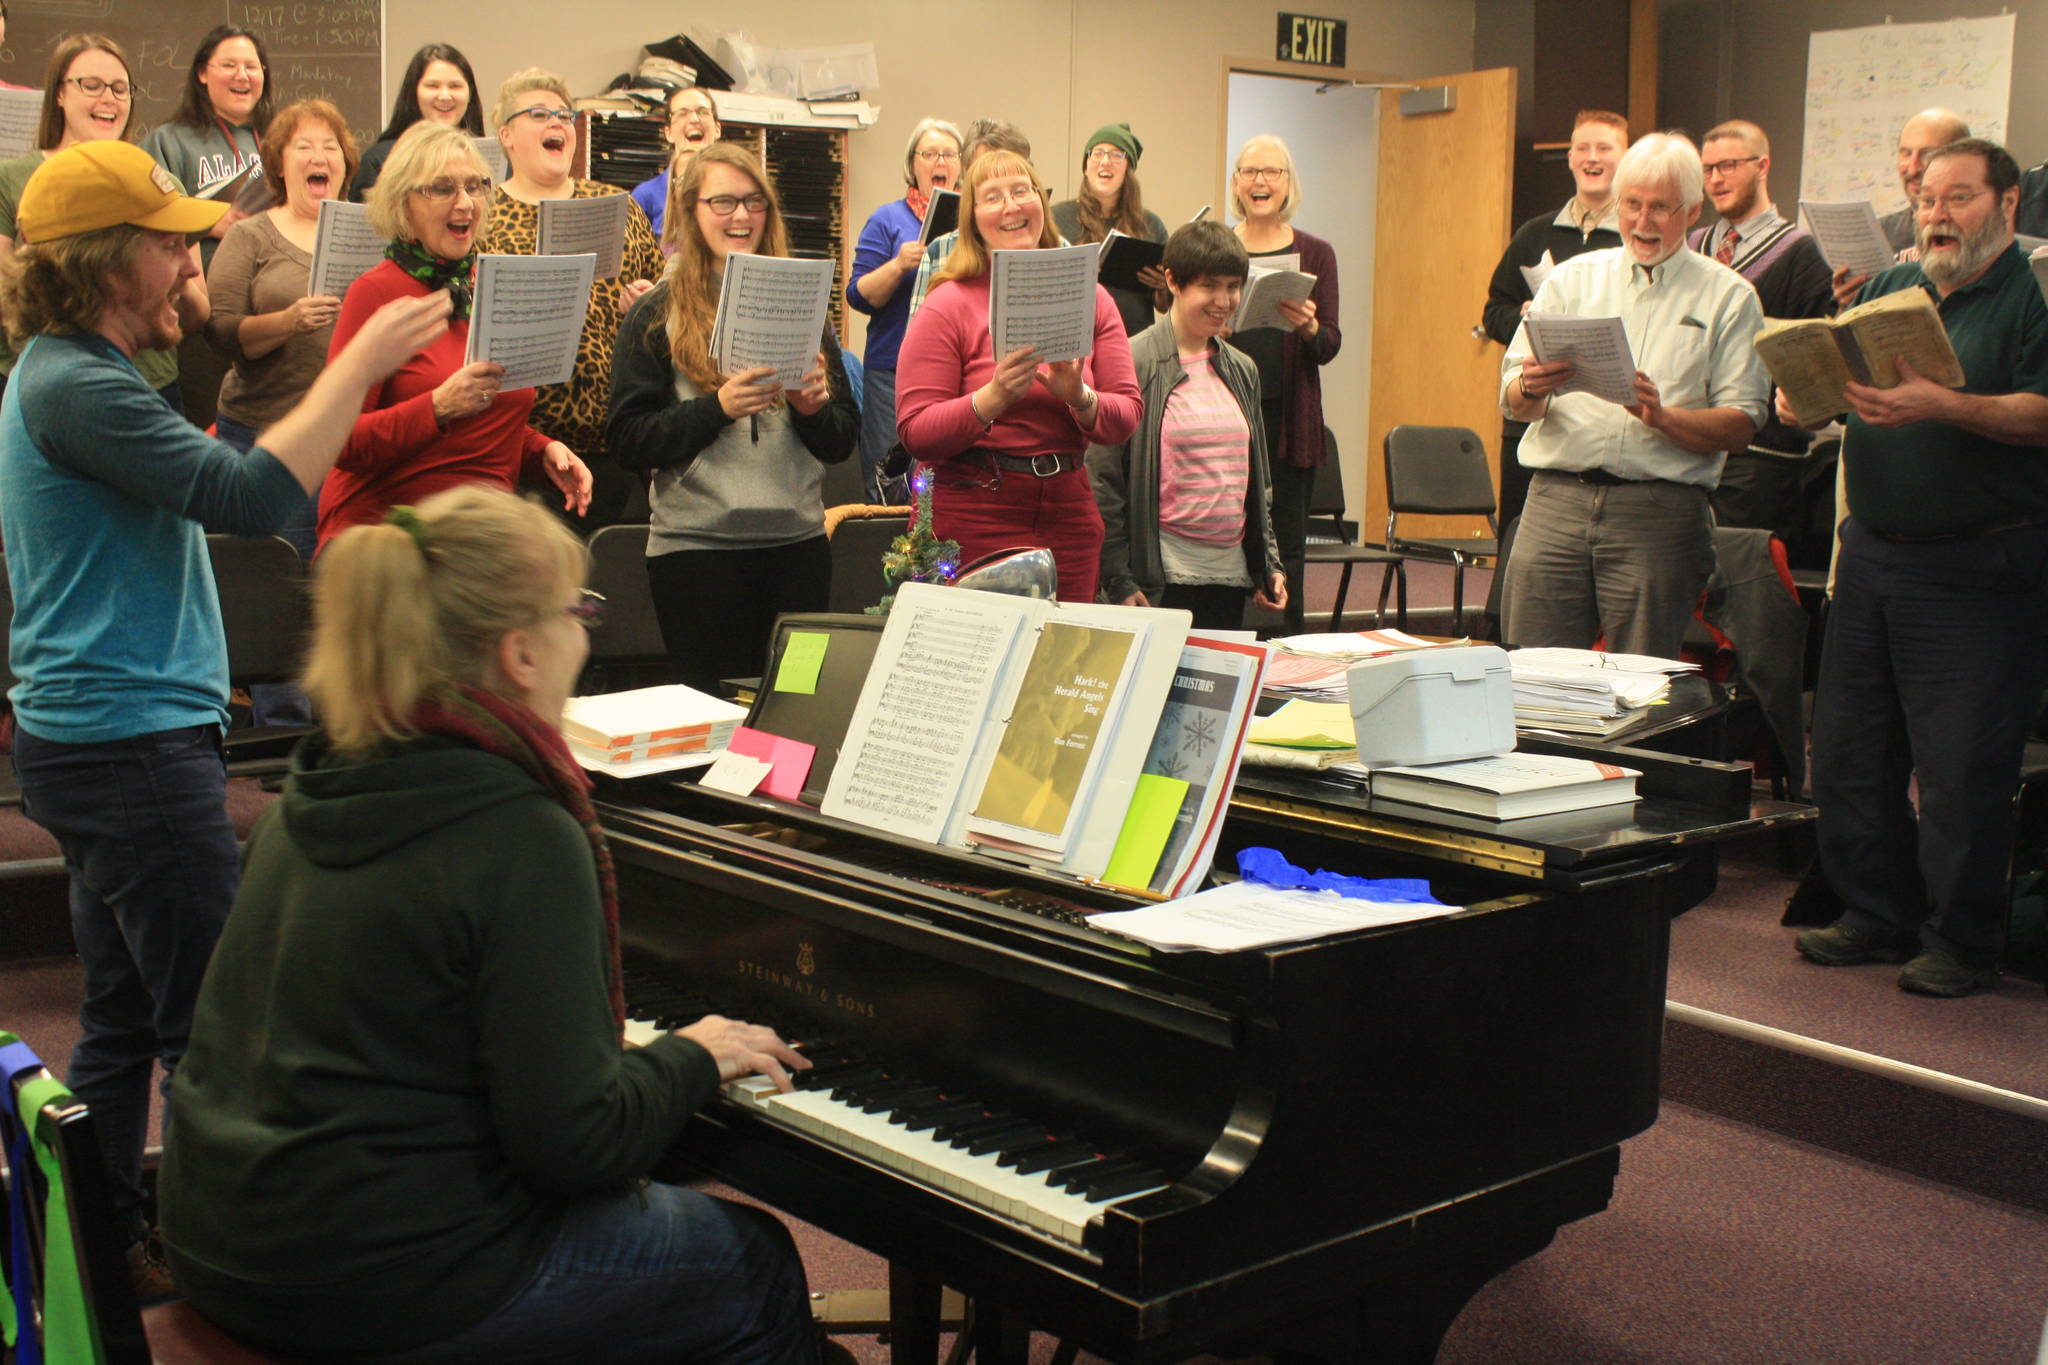 Members of the Kenai Peninsula Singers perform during a rehearsal on Dec. 11. The Peninsula Singers and Redoubt Chamber Orchestra will perform together in the 2017 Evening of Christmas on Friday, Dec. 15. (Photo by Erin Thompson/Peninsula Clarion)